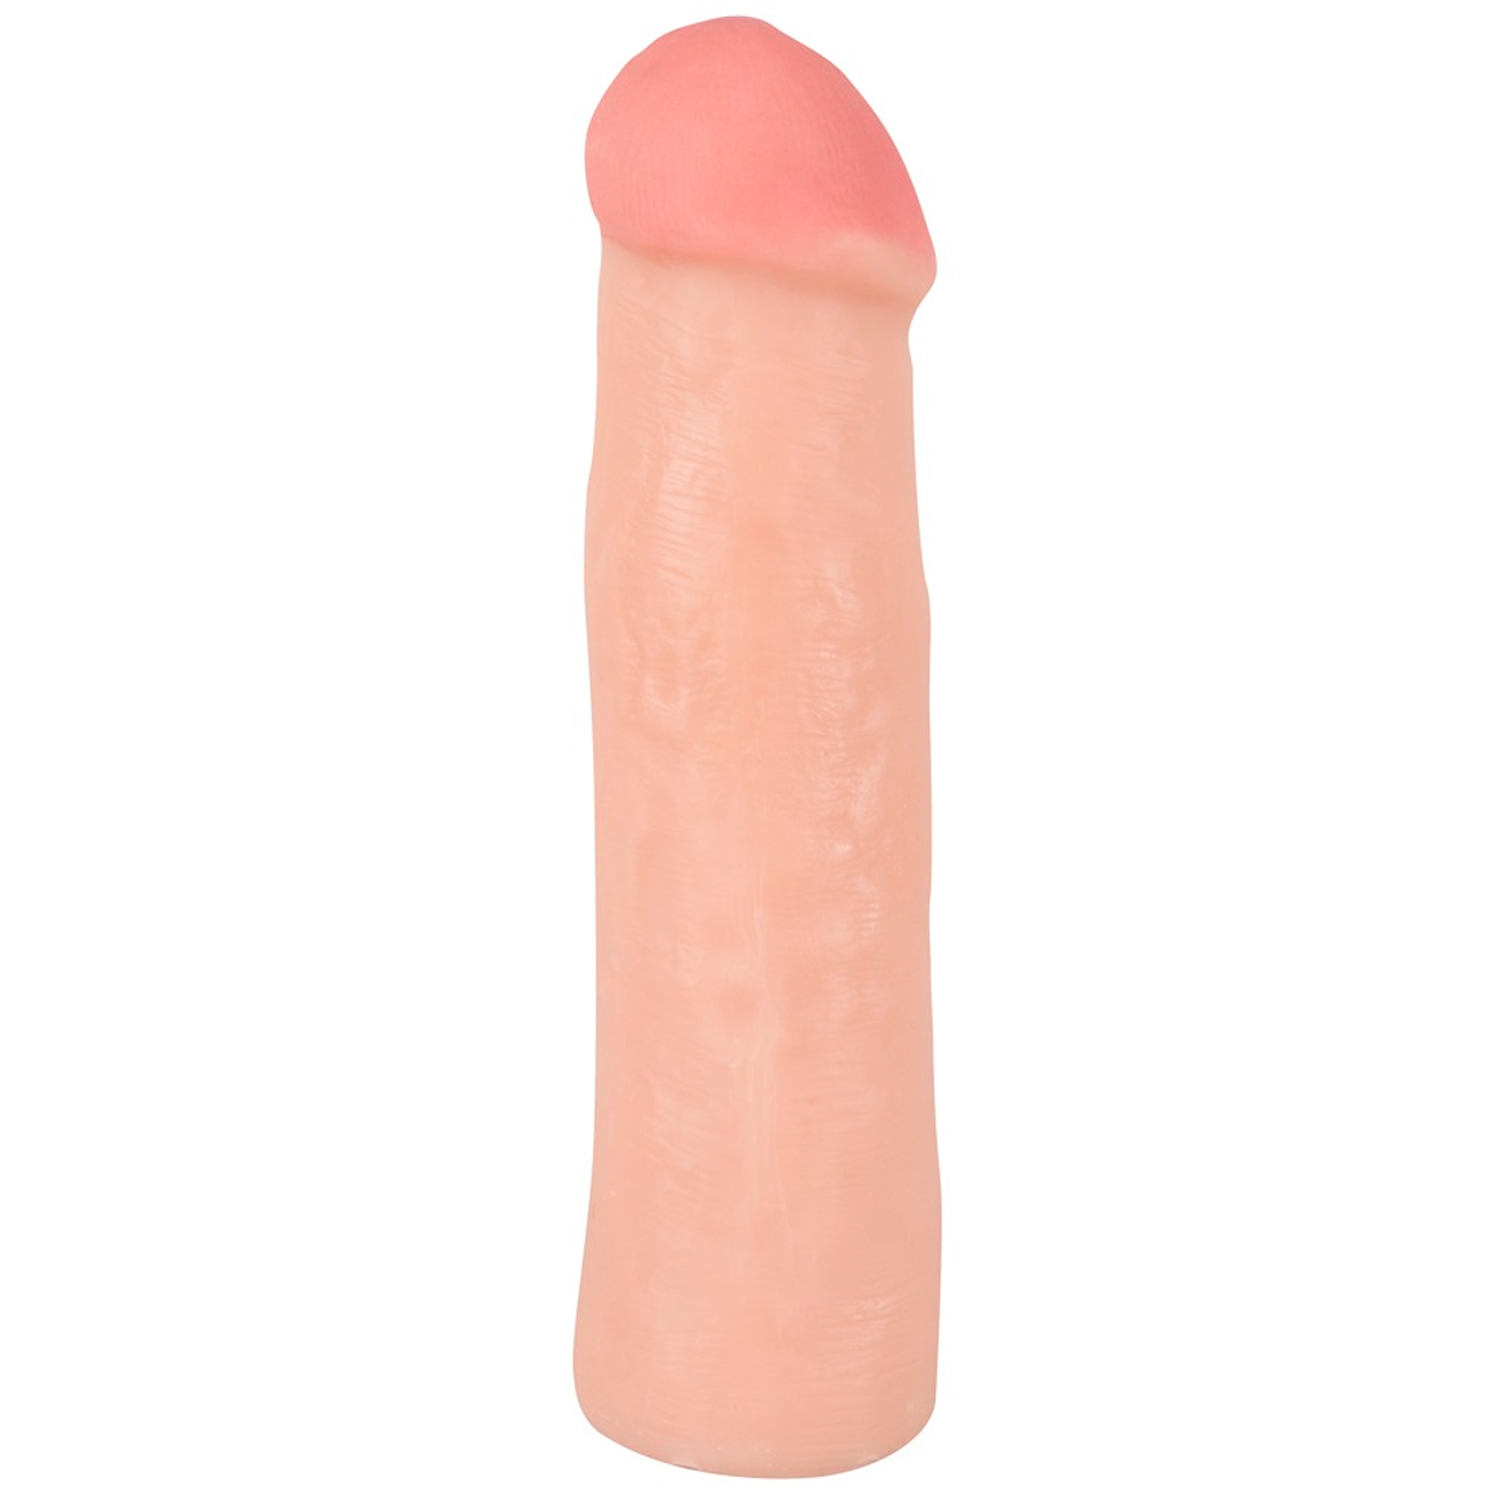 You2Toys You2Toys Big White Penis Sleeve - Beige